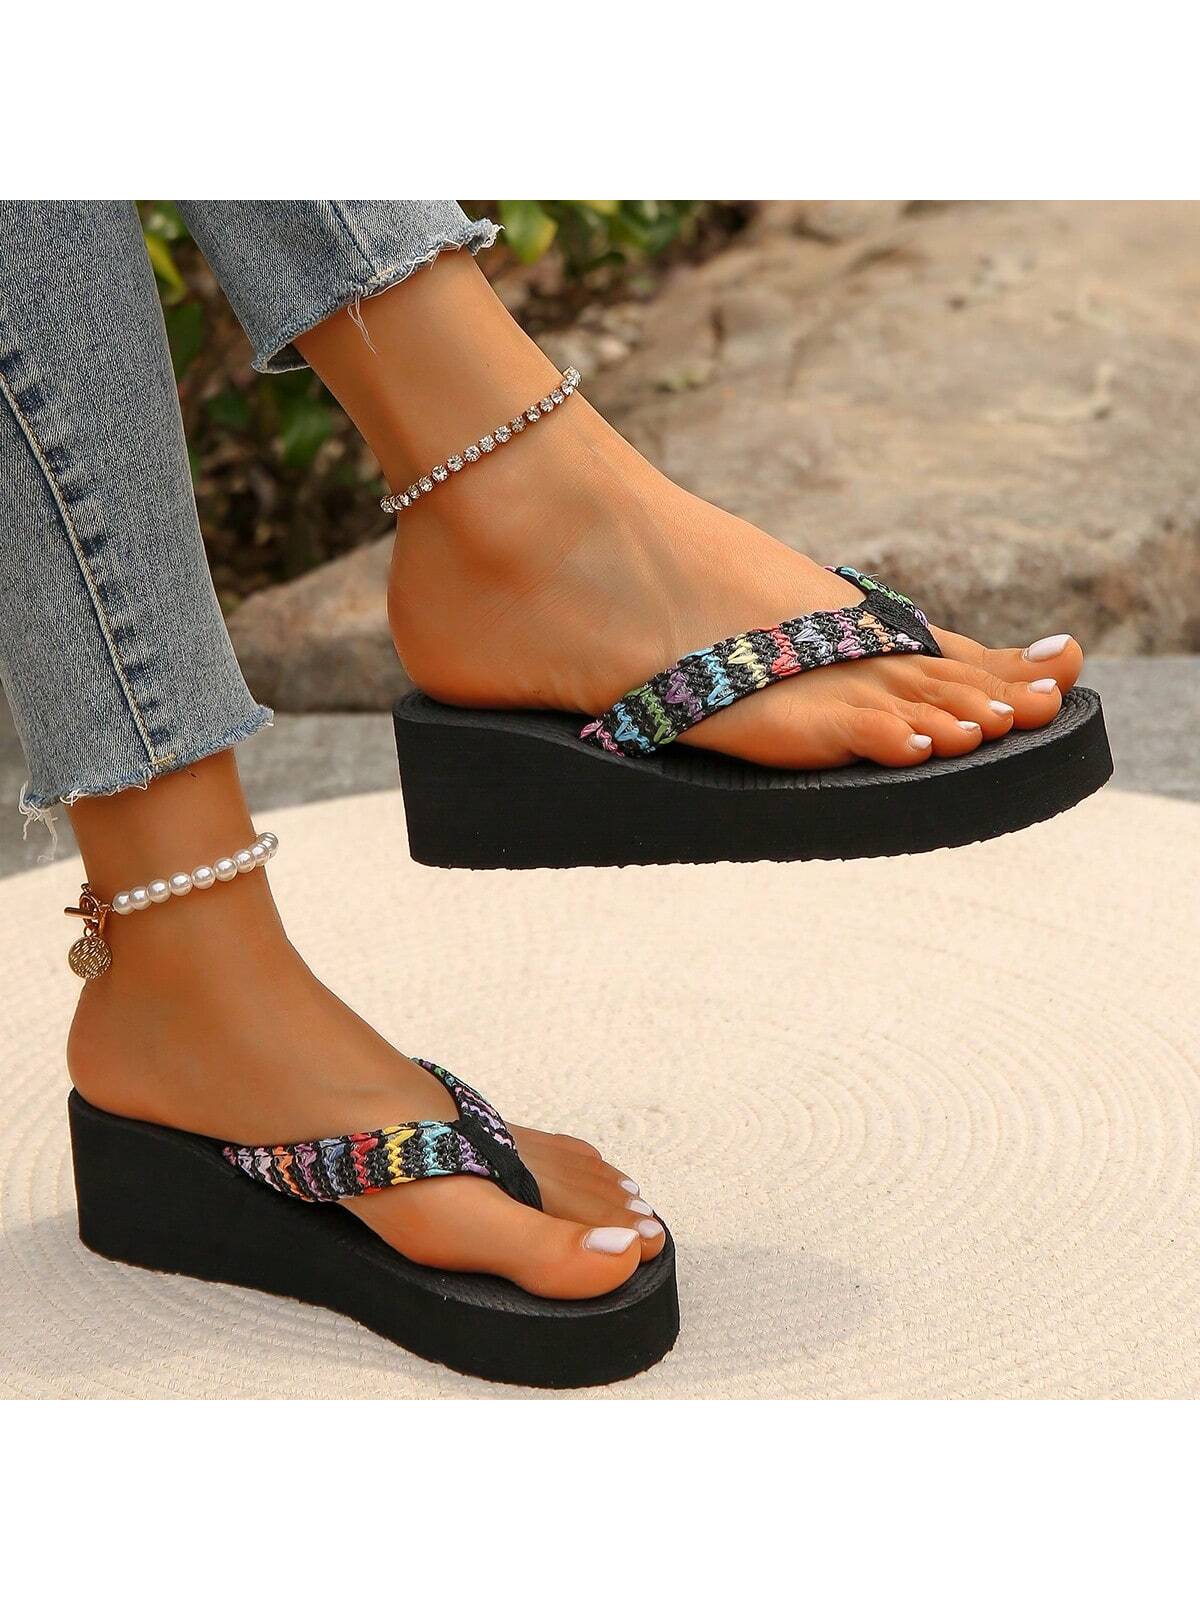 Women Thick-Soled 5cm Wedge Heel  Rope Flip-Flops Shoes, Anti-Slip And Wear-Resistant, Suitable For Casual Beach Holiday, Summer Wind Slope Heeled Slippers-Black-4